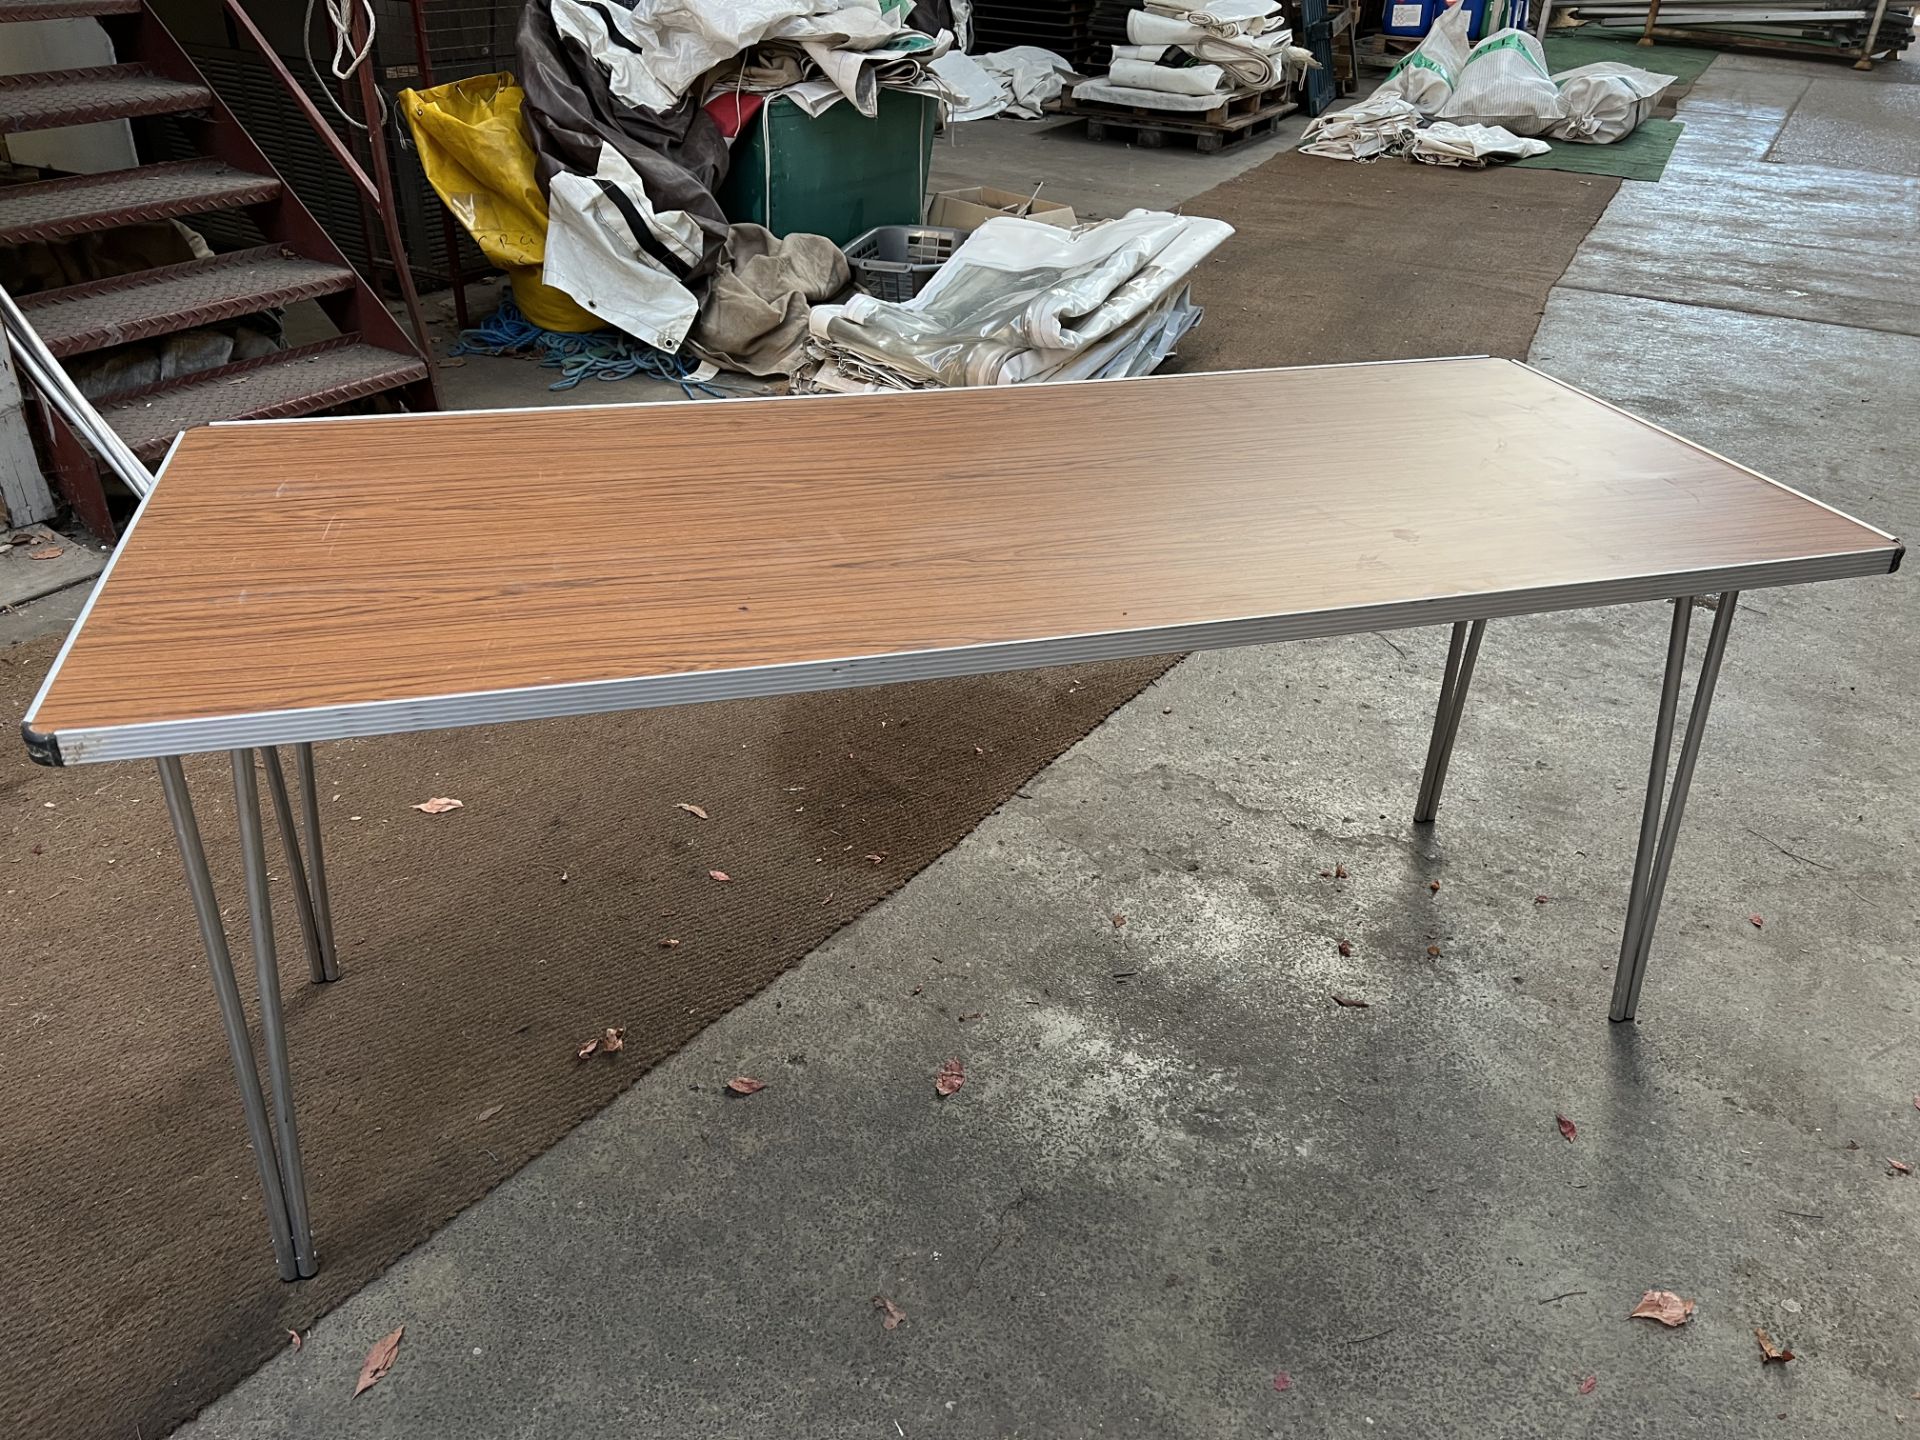 15 Gopak 6ft trestle tables with folding legs and melamine top. This lot is subject to VAT.